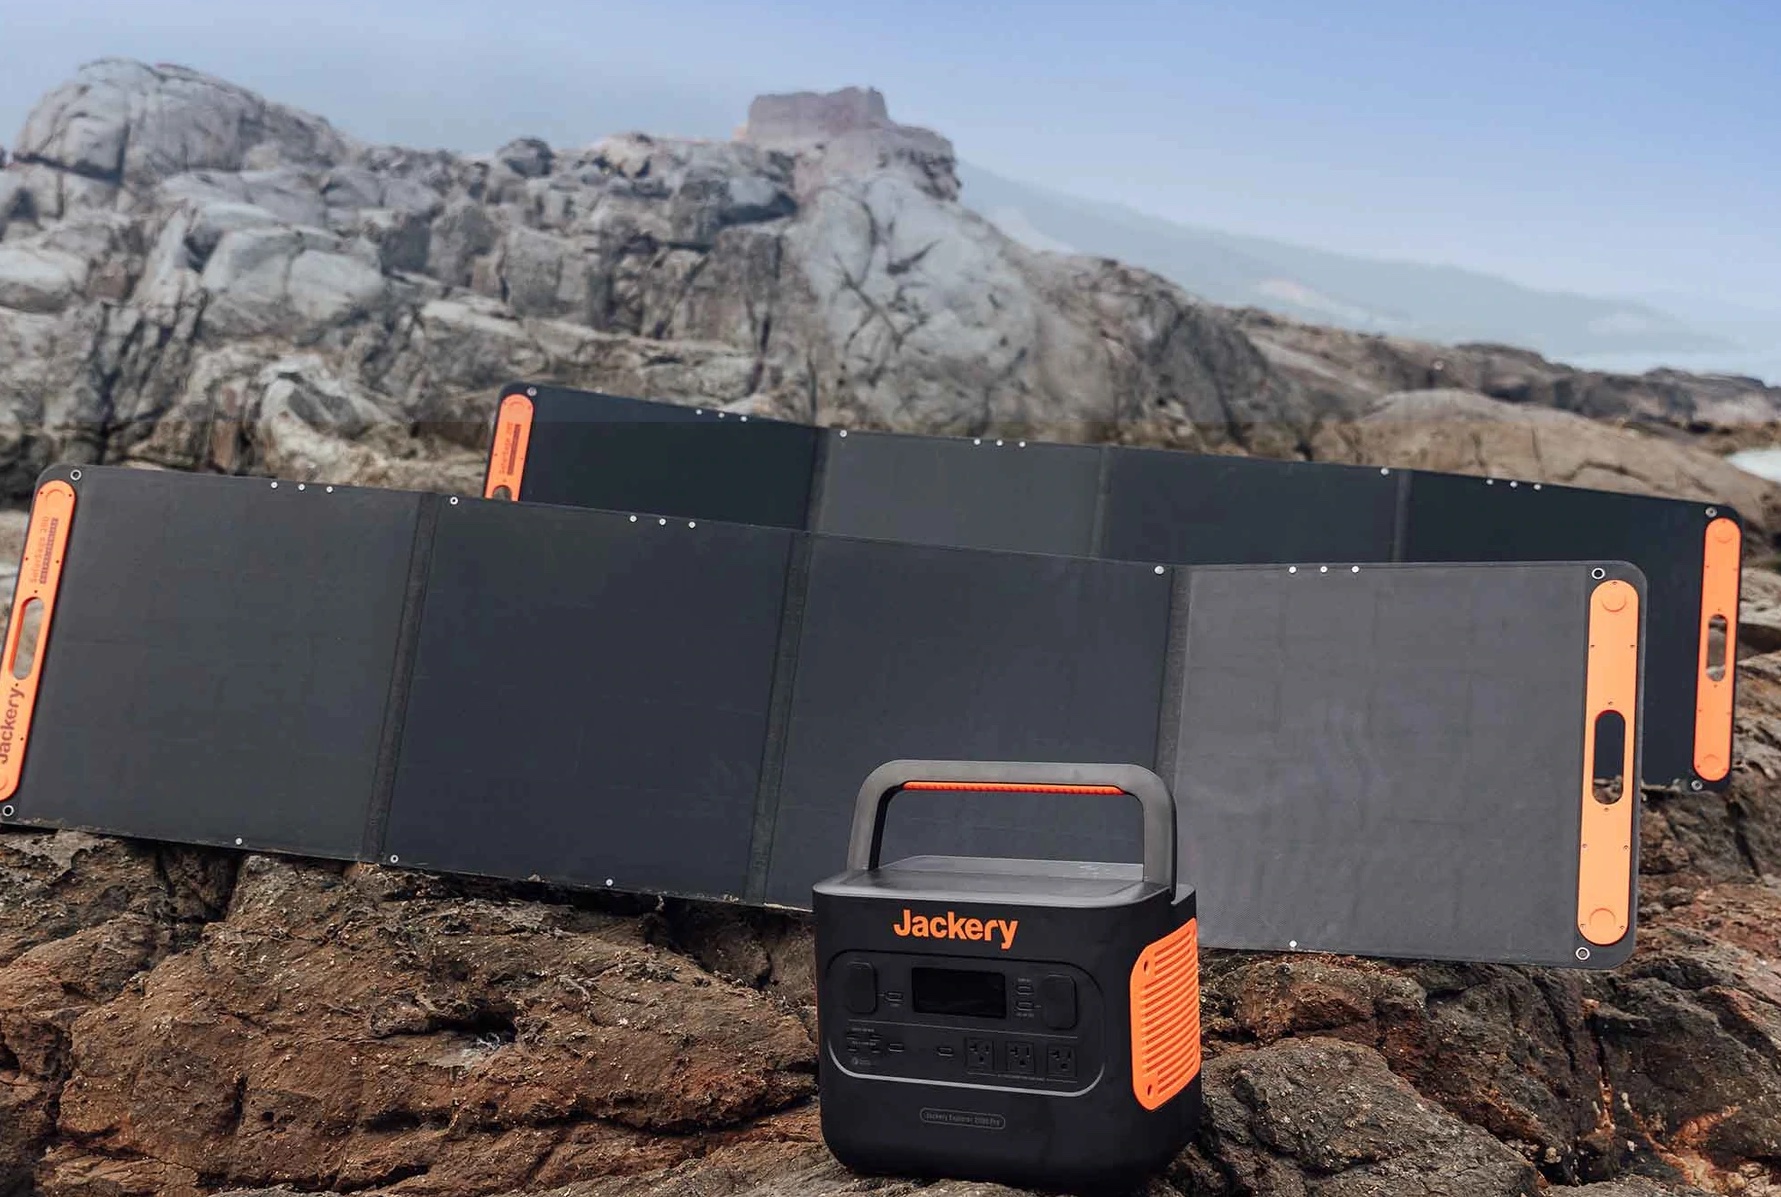 Jackery Solar Saga Panels with power pack on a rocky slope